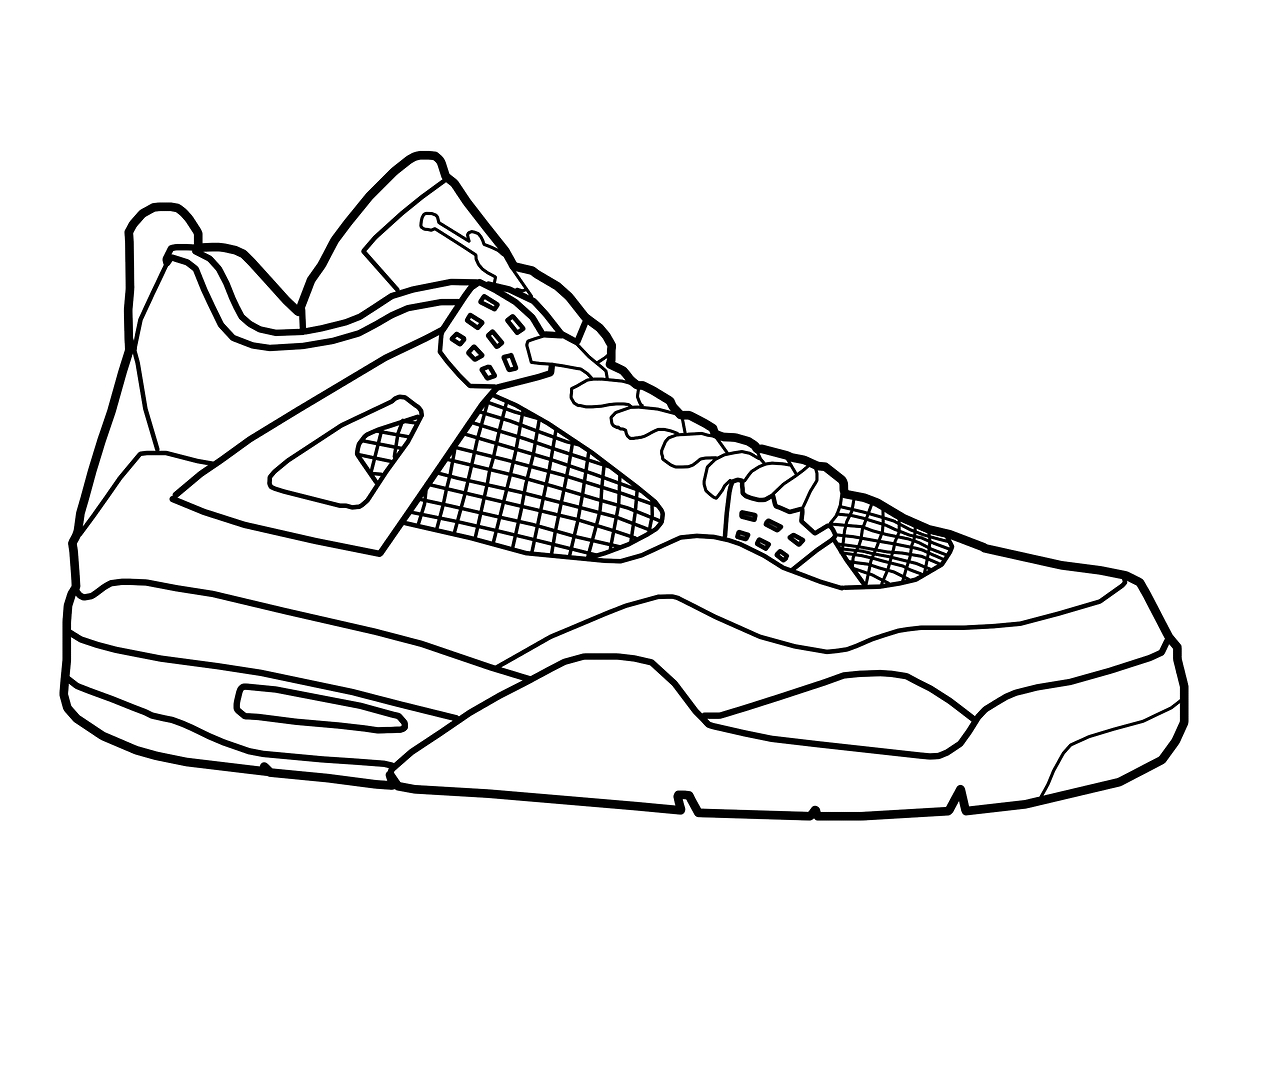 Converse Shoe Coloring Page at Free